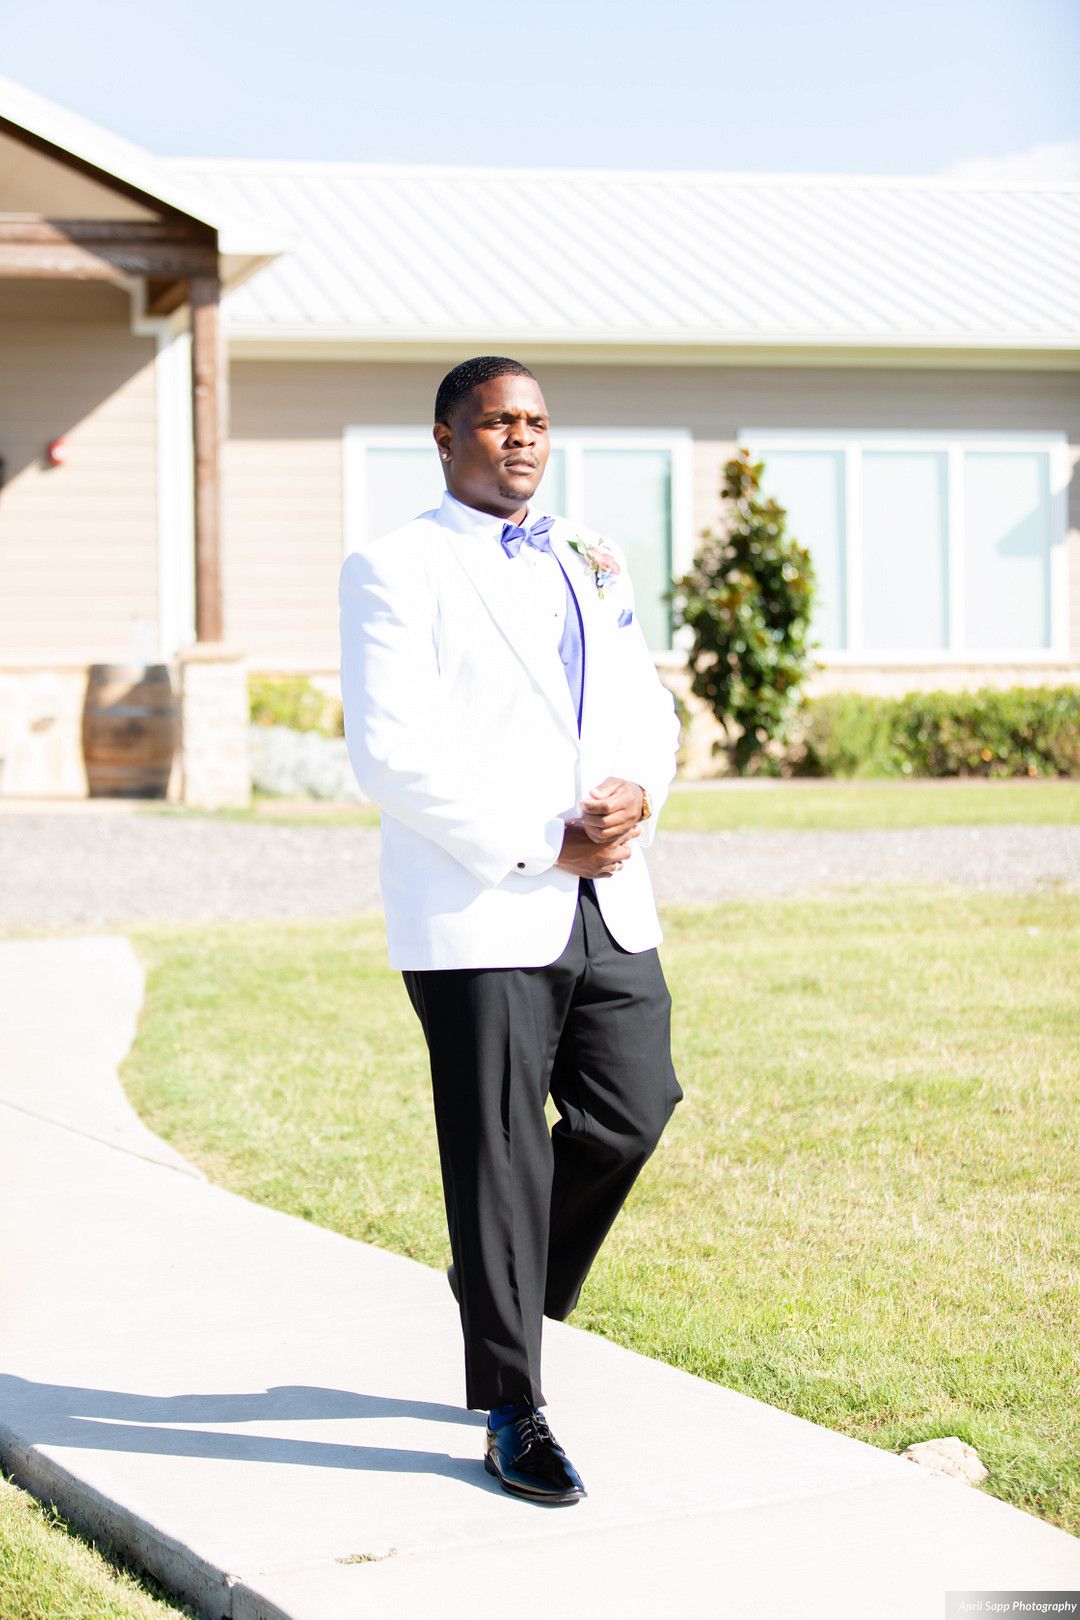 Groom's suit modern and stylish by April Sapp Photography